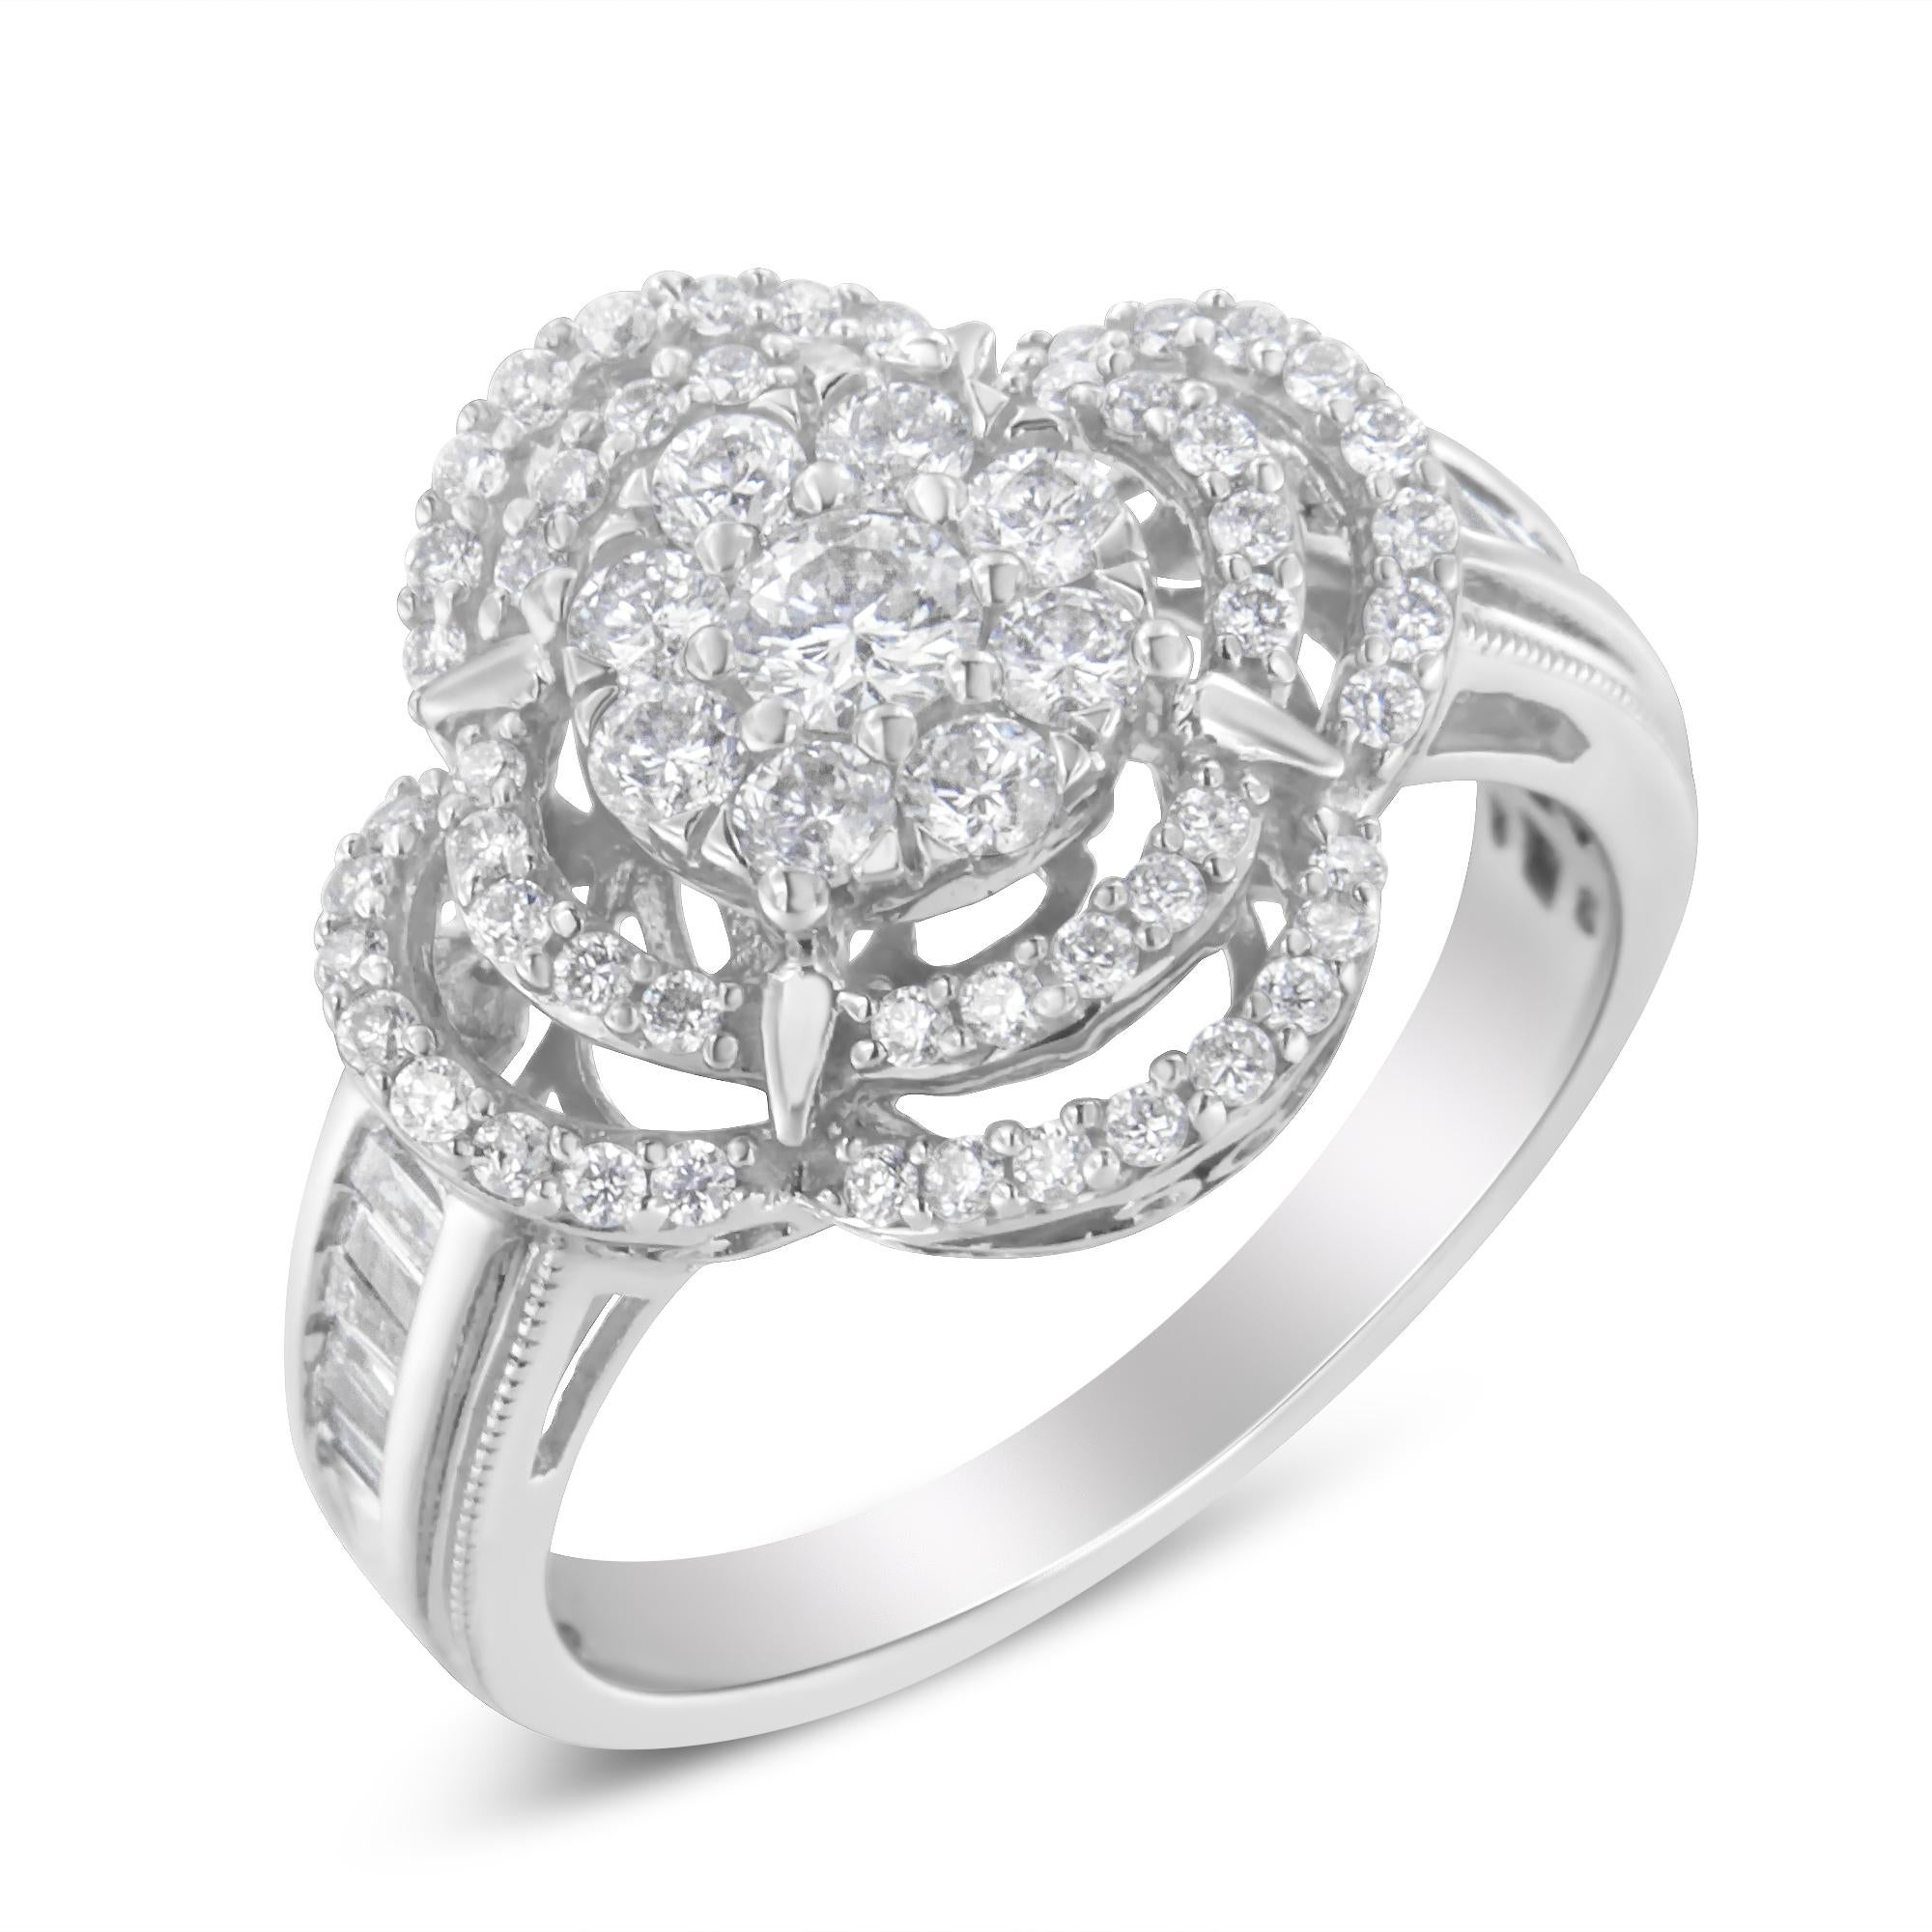 Elegant and everlasting, this ring bears a brilliant blossom that will never fade away. Perfect for the one you love, this 14K white gold style features a flower-shaped center cluster of glistening round diamonds. A row of shimmering baguette